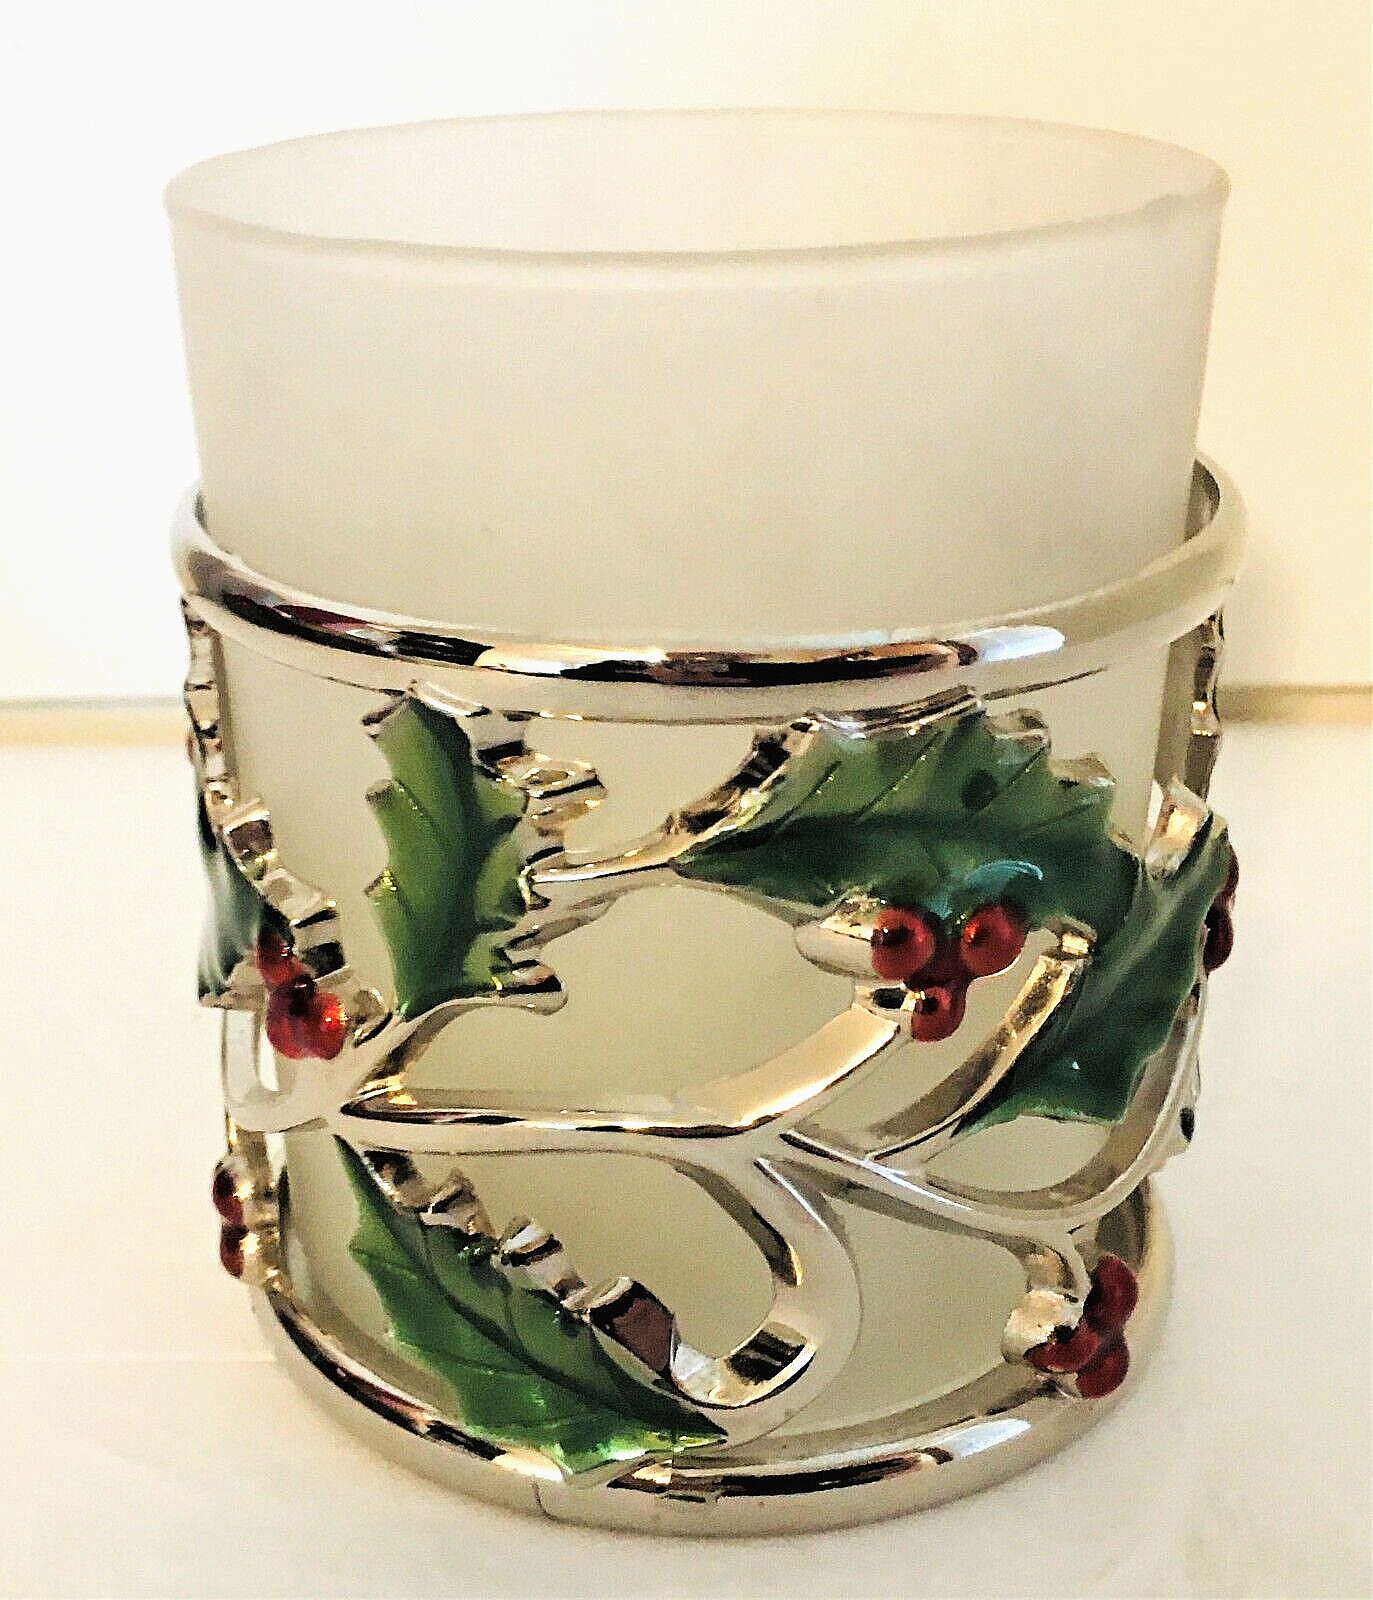 Primary image for Lenox Holiday Votive Candle Holder "Silver" Metal & Frosted Glass in Box EUC